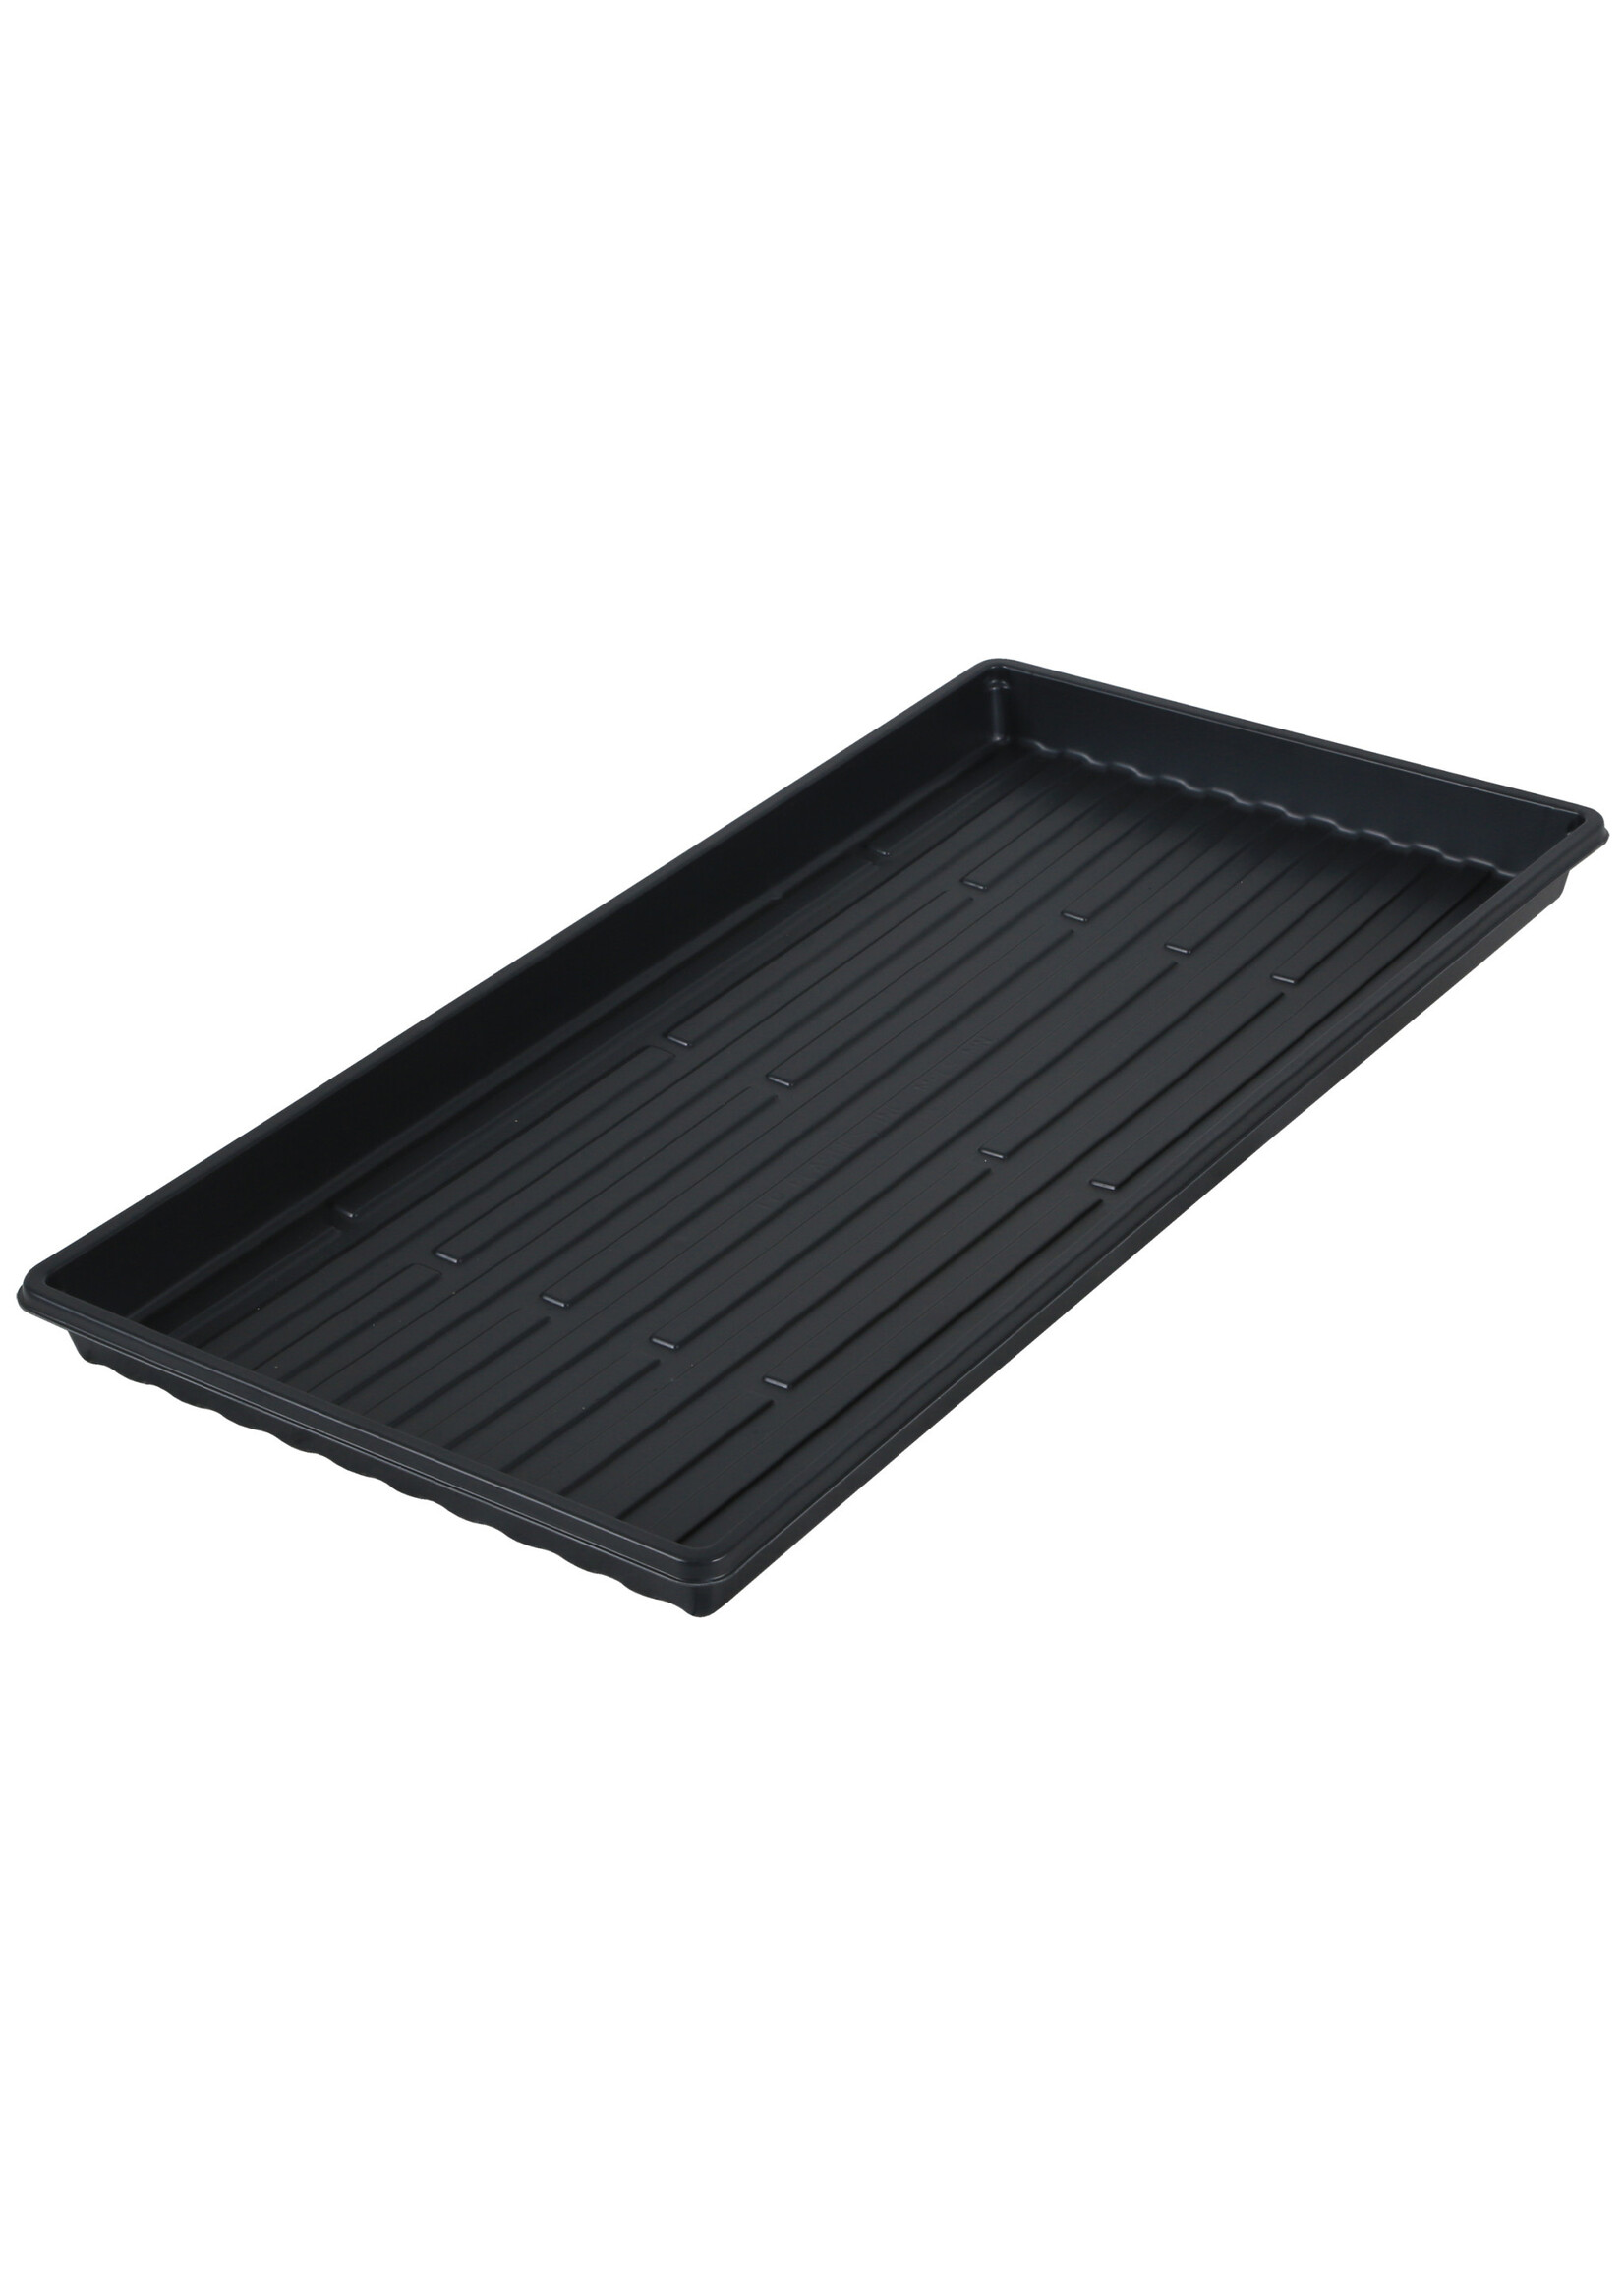 Super Sprouter Super Sprouter 10 x 20 Short Germination Tray No Hole (100/Cs)